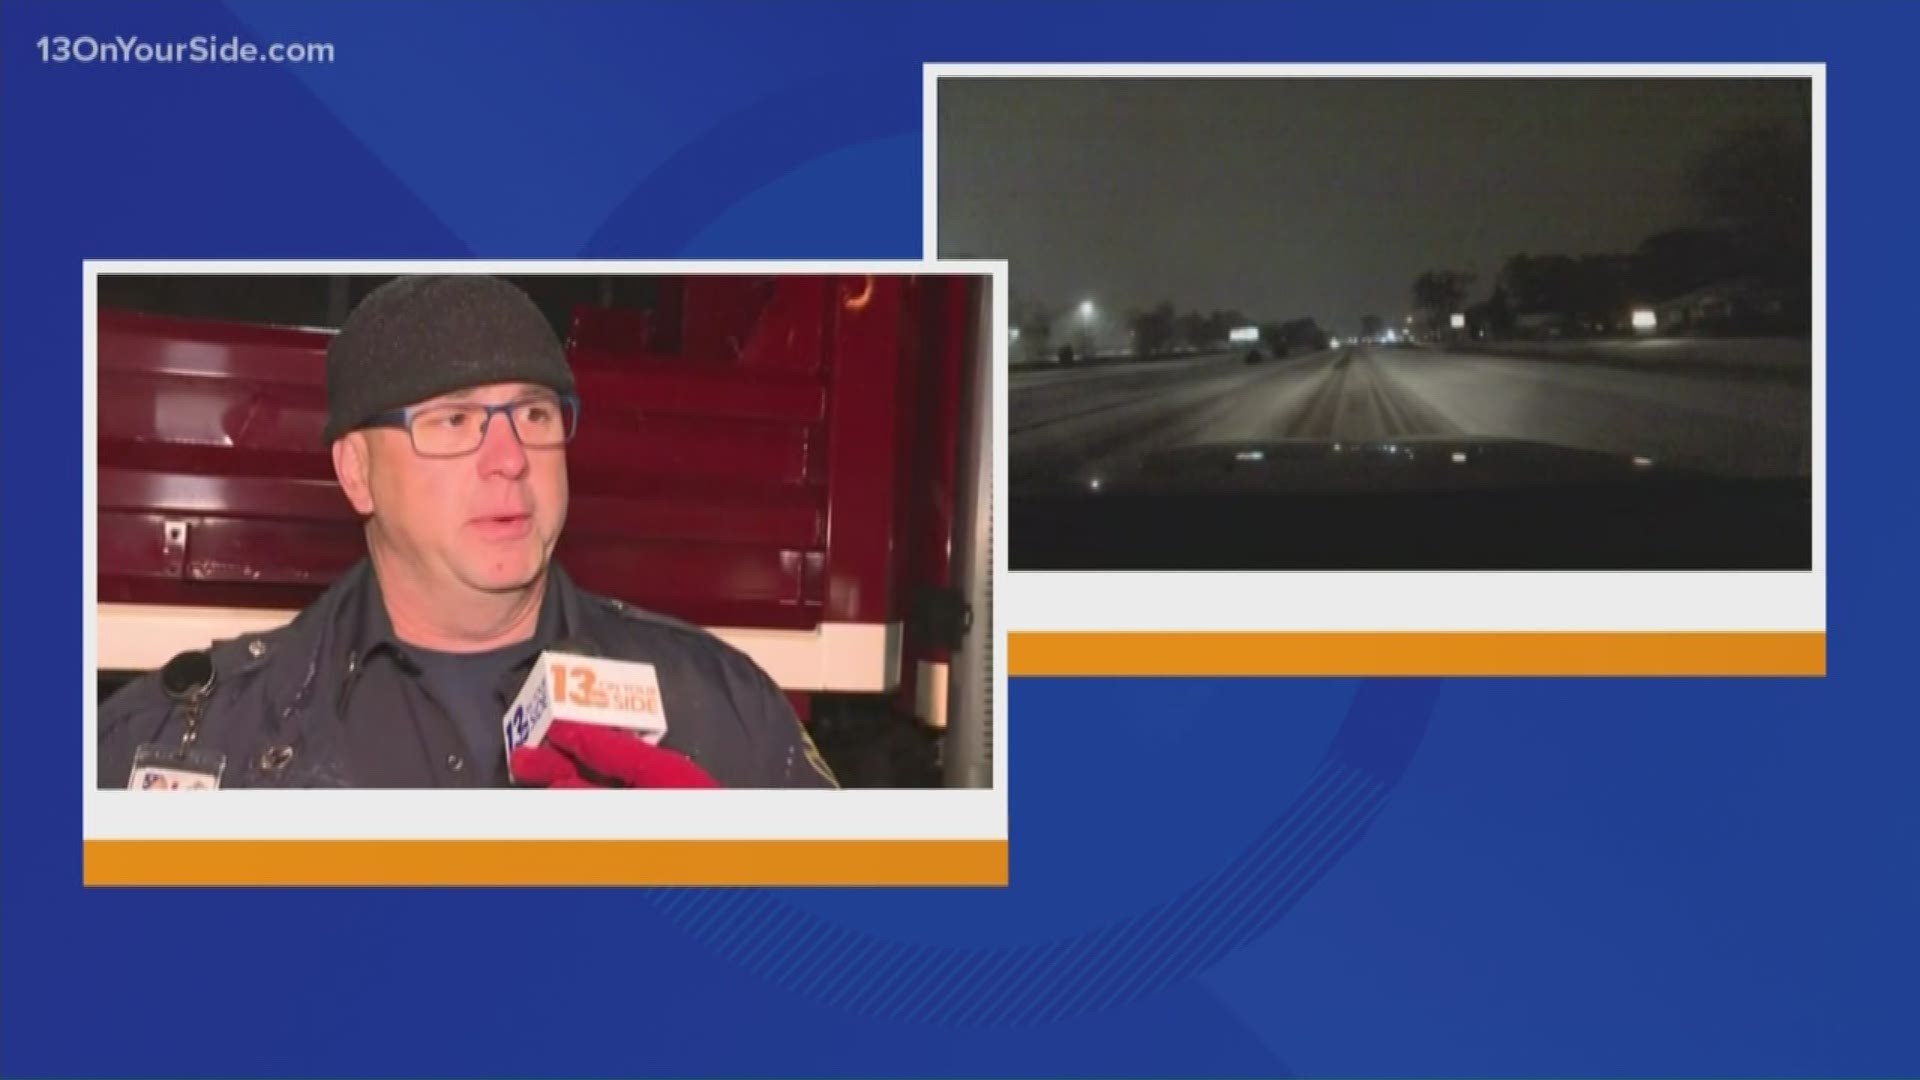 13 ON YOUR SIDE's Angela Cunningham is live with the Grand Rapids Fire Department reminding drivers to slow down and move over for emergency responders.